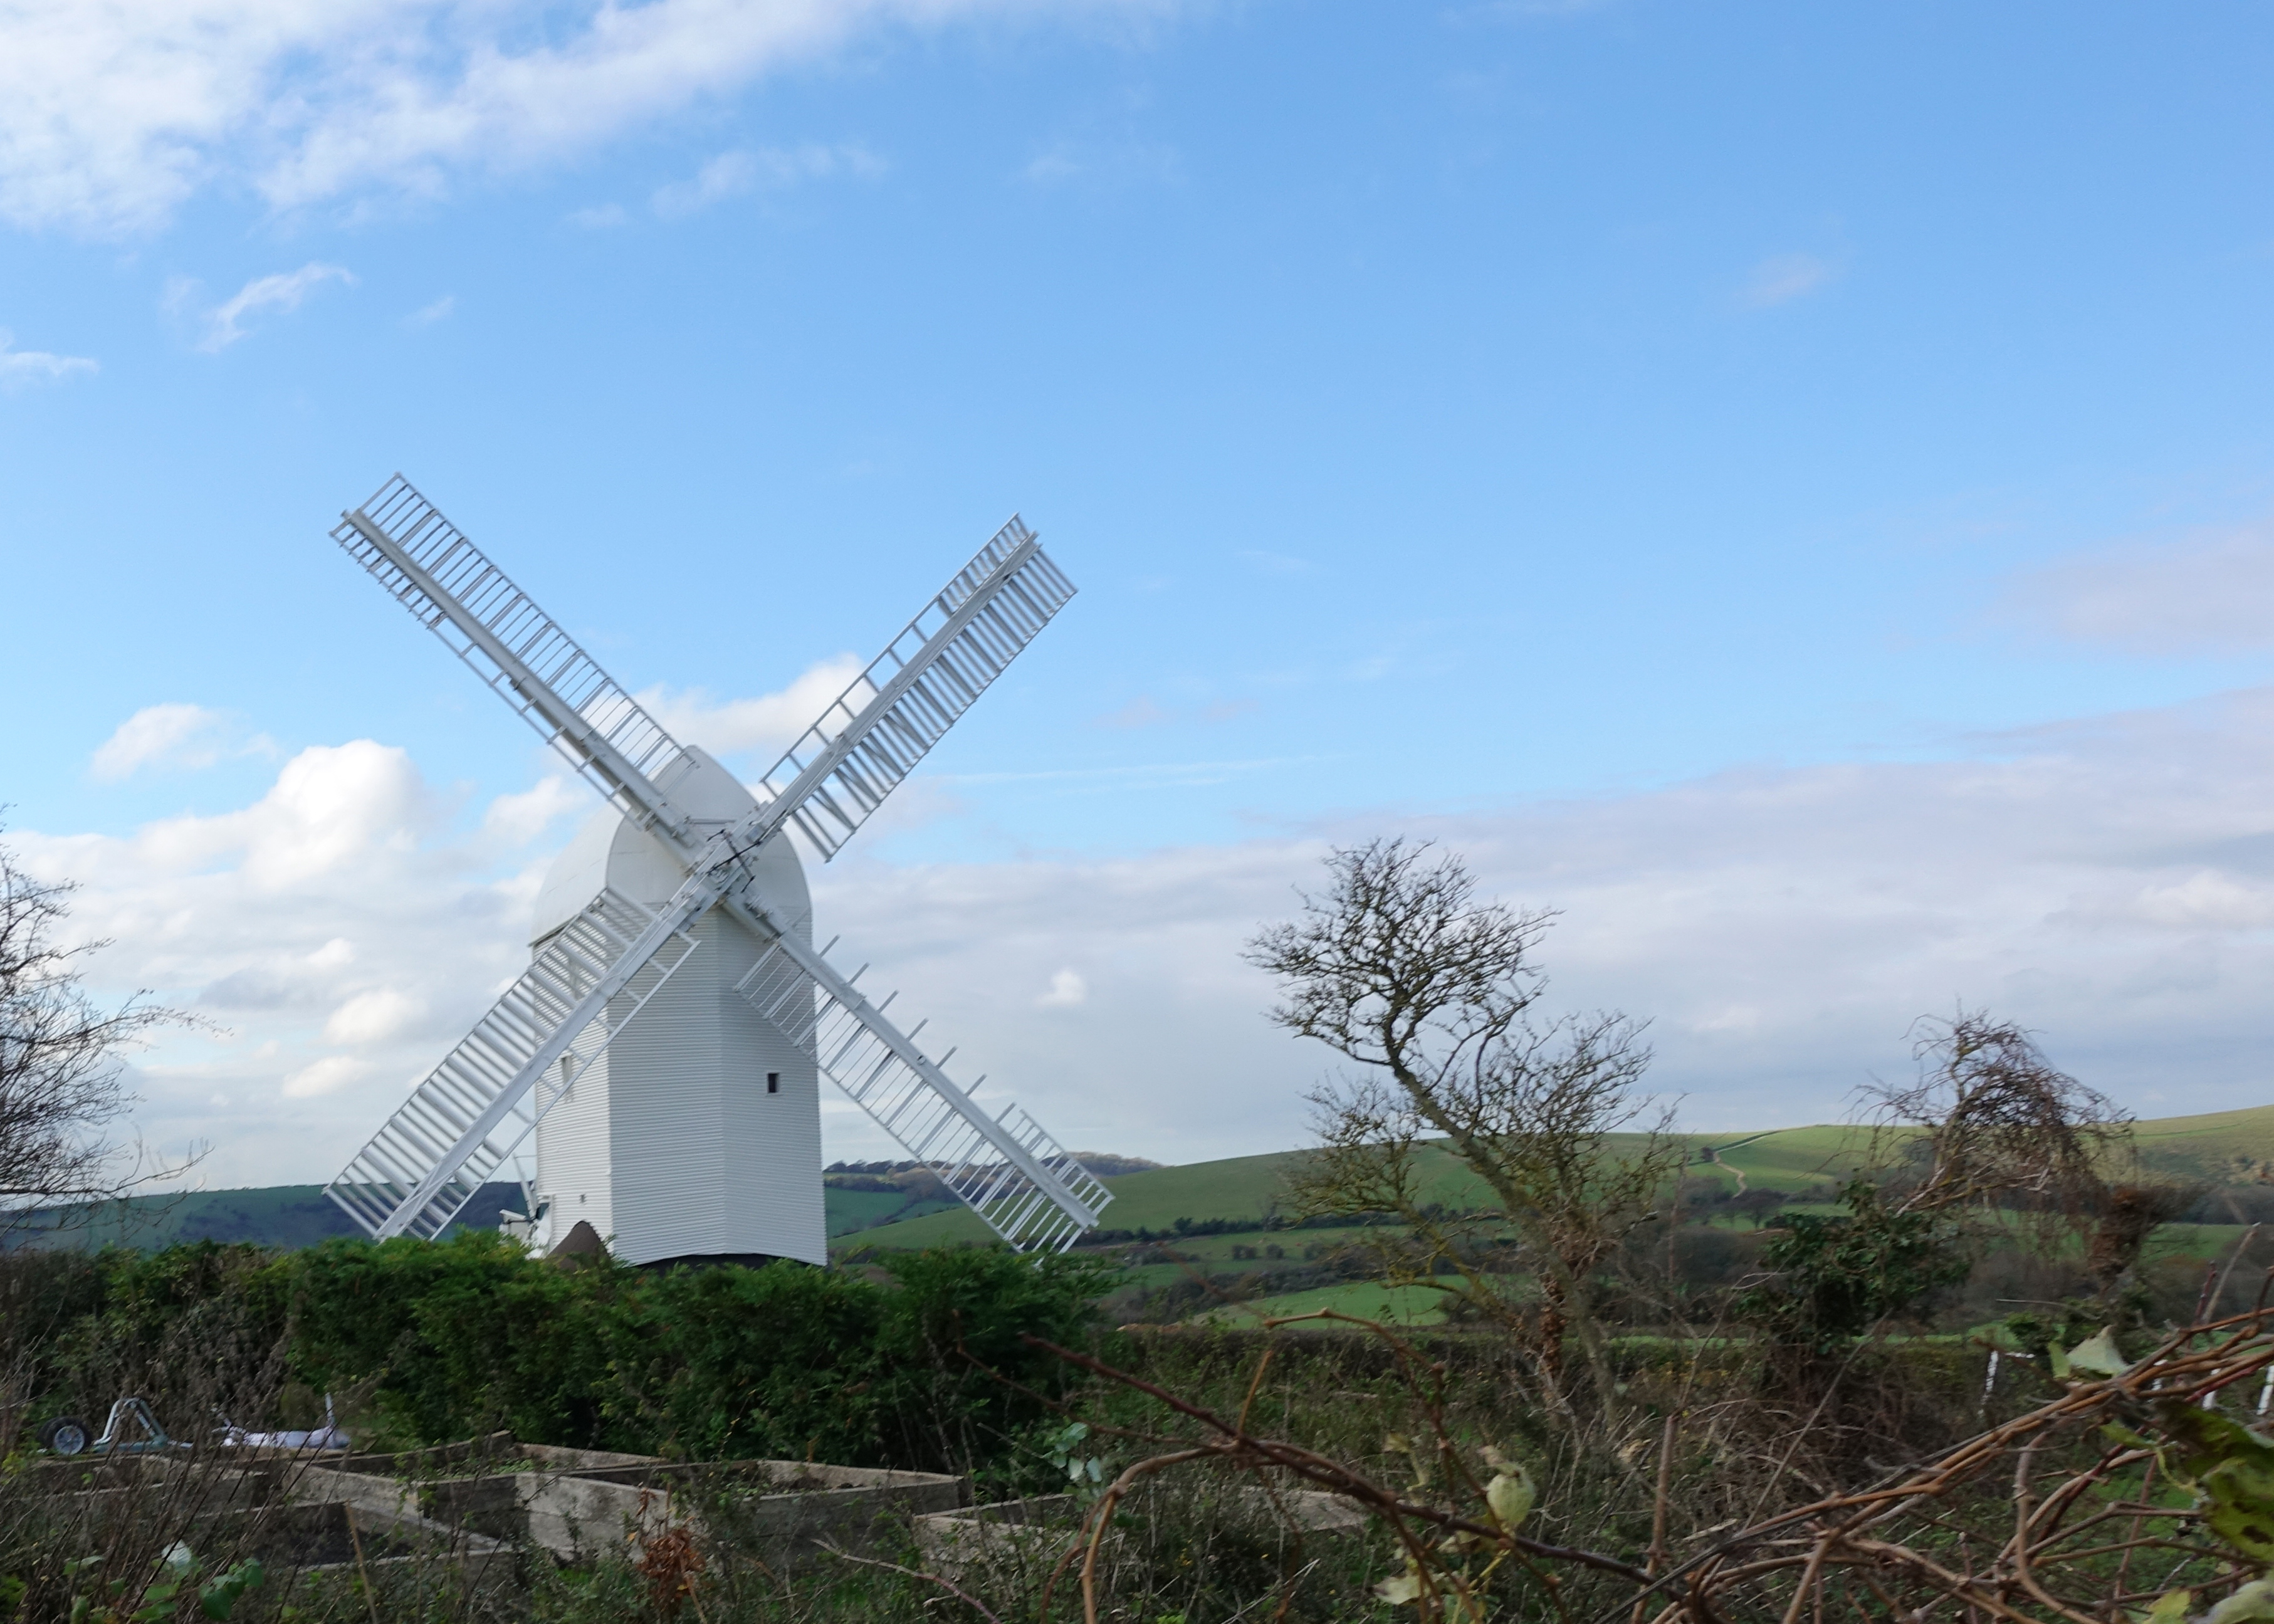 Post Mill Jill is one of the Clayton windmills and can be seen for miles